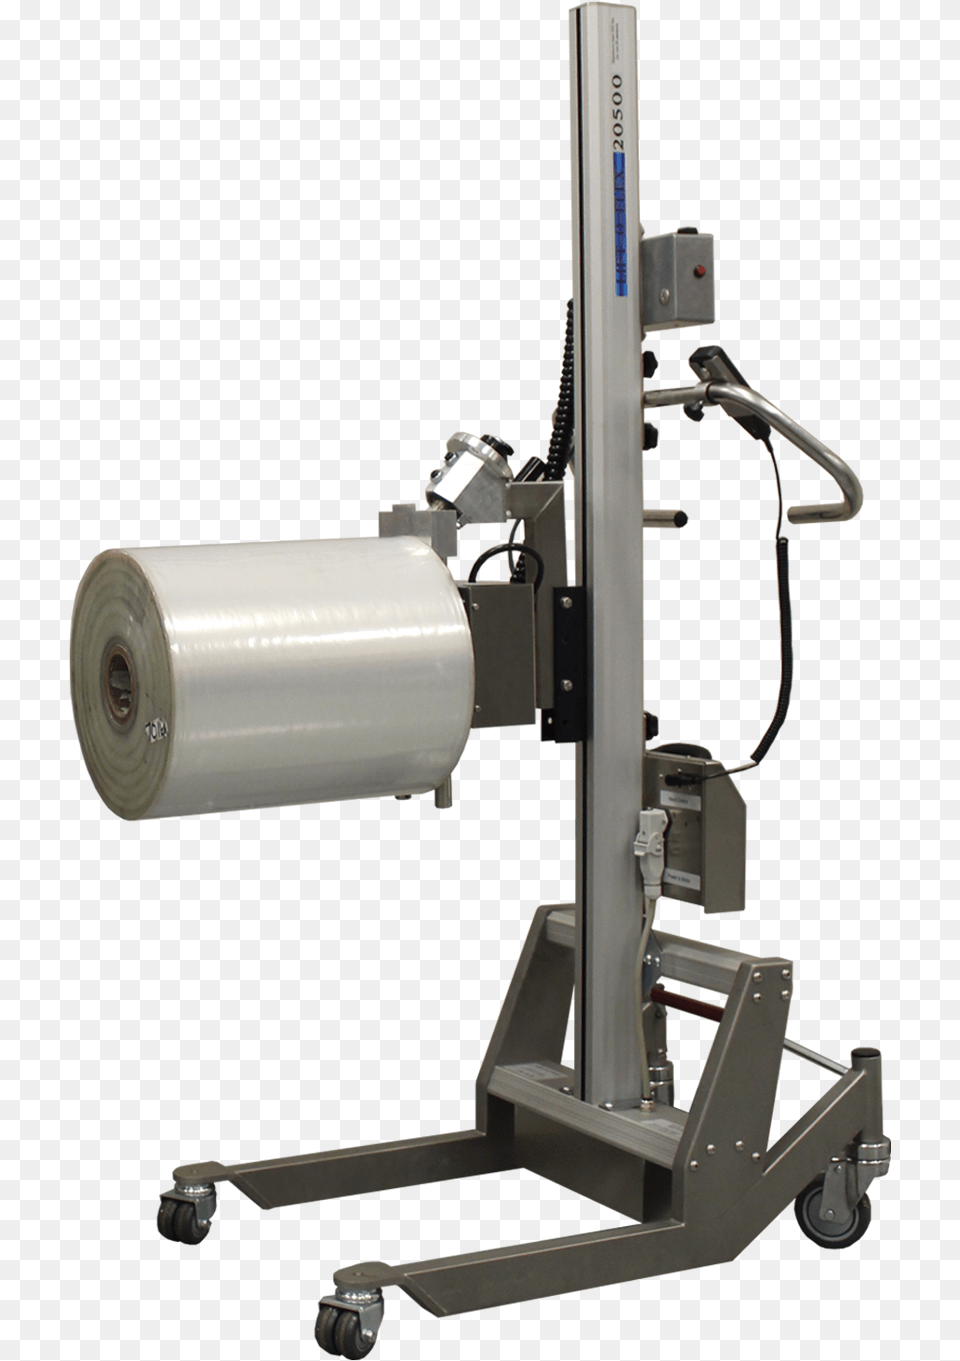 Series With Expand O Turn Core Grip To Manipulate Film Roll Handling Equipment, Machine, Wheel, Plastic Wrap Png Image